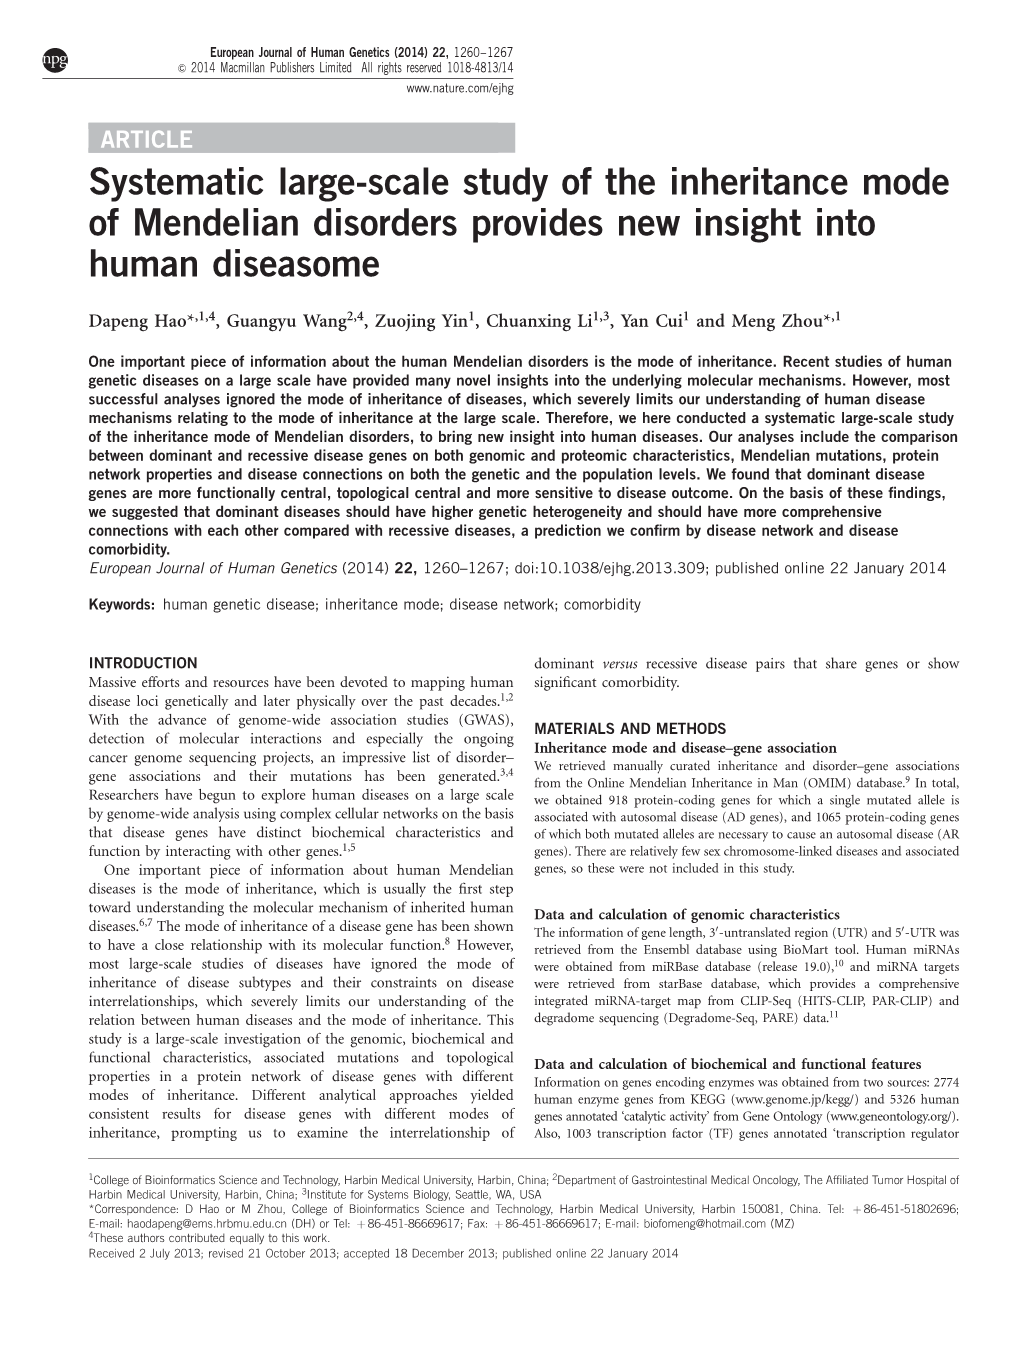 Systematic Large-Scale Study of the Inheritance Mode of Mendelian Disorders Provides New Insight Into Human Diseasome